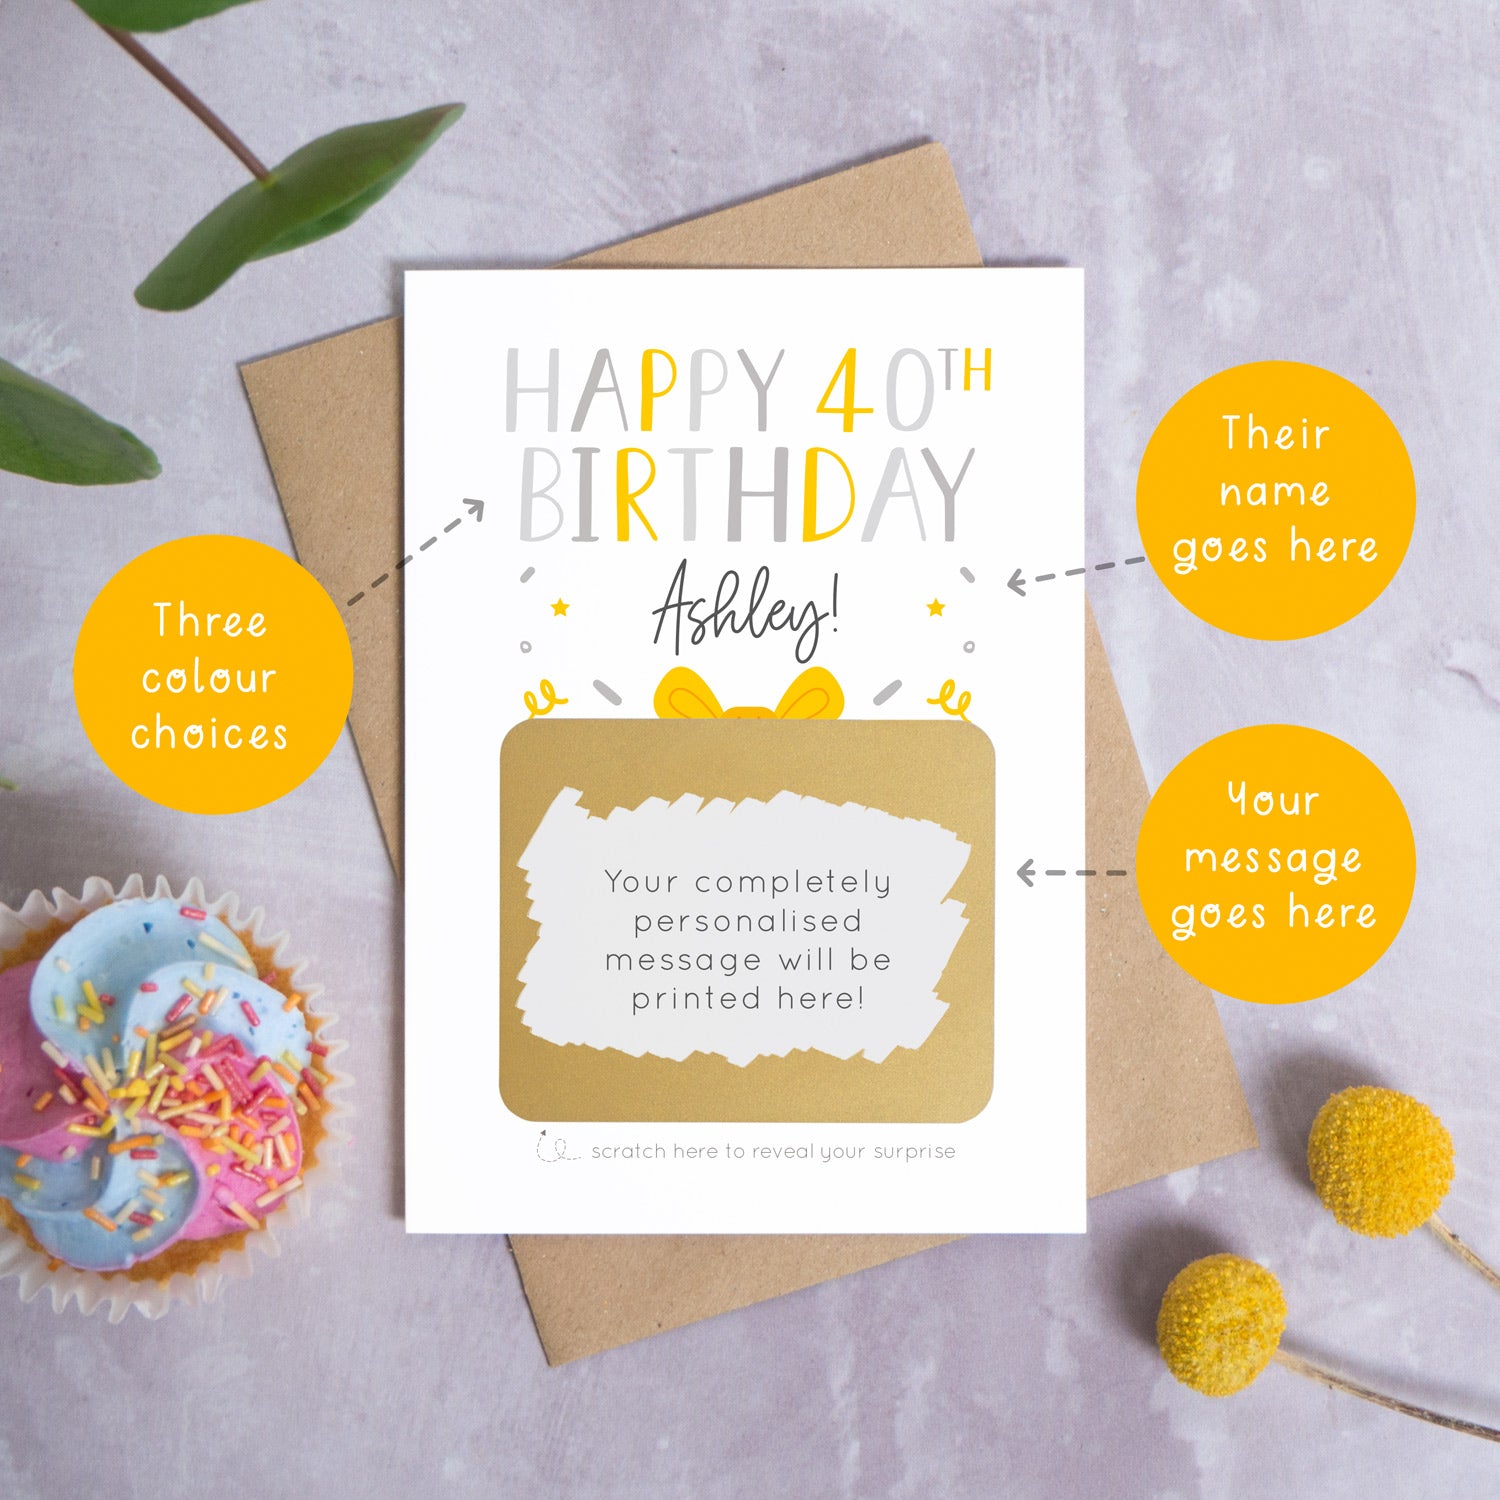 A personalised happy 40th birthday scratch card in grey that has been photographed on a grey background with foliage and a cupcake. There are also orange circles laid over the top of this image with arrows pointing to the areas that can be customised. In this instance they point to the name, the colour choices and the personalised scratch off message.